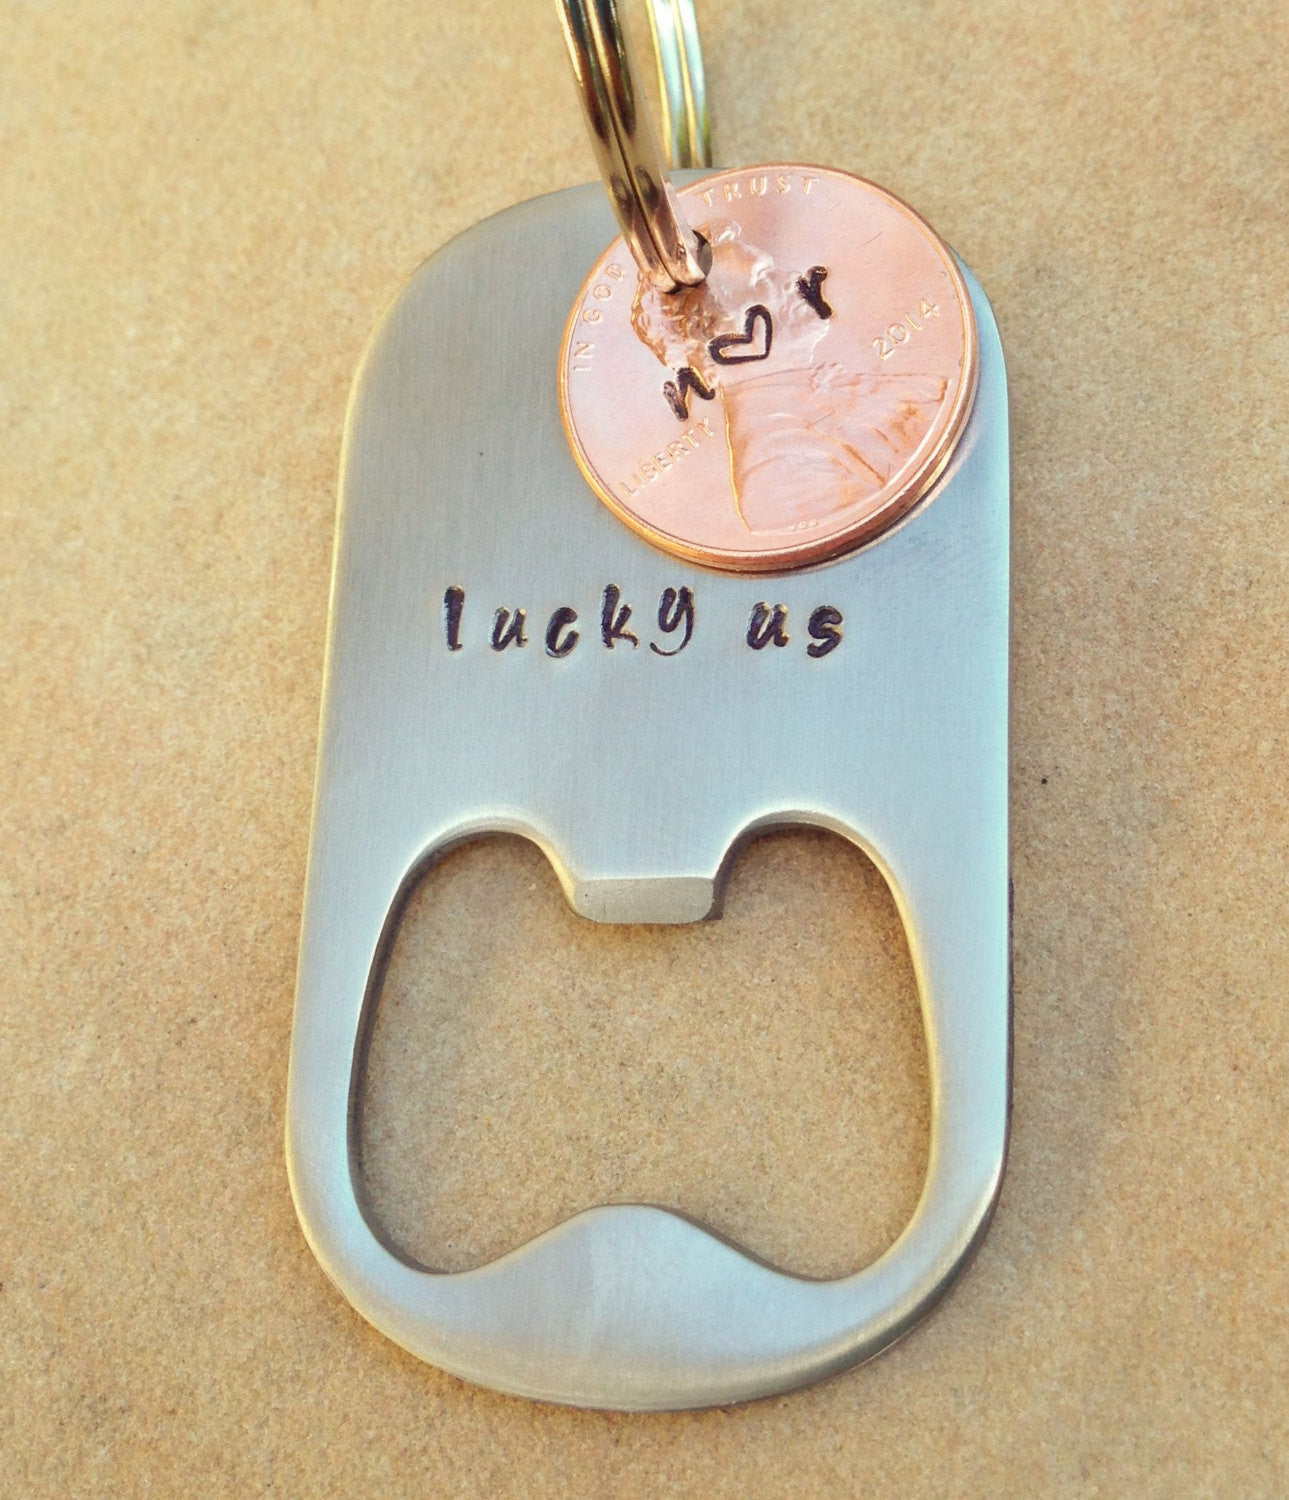 Lucky Us Keychain, Lucky Us Bottle Opener Keychain - Natashaaloha, jewelry, bracelets, necklace, keychains, fishing lures, gifts for men, charms, personalized, 